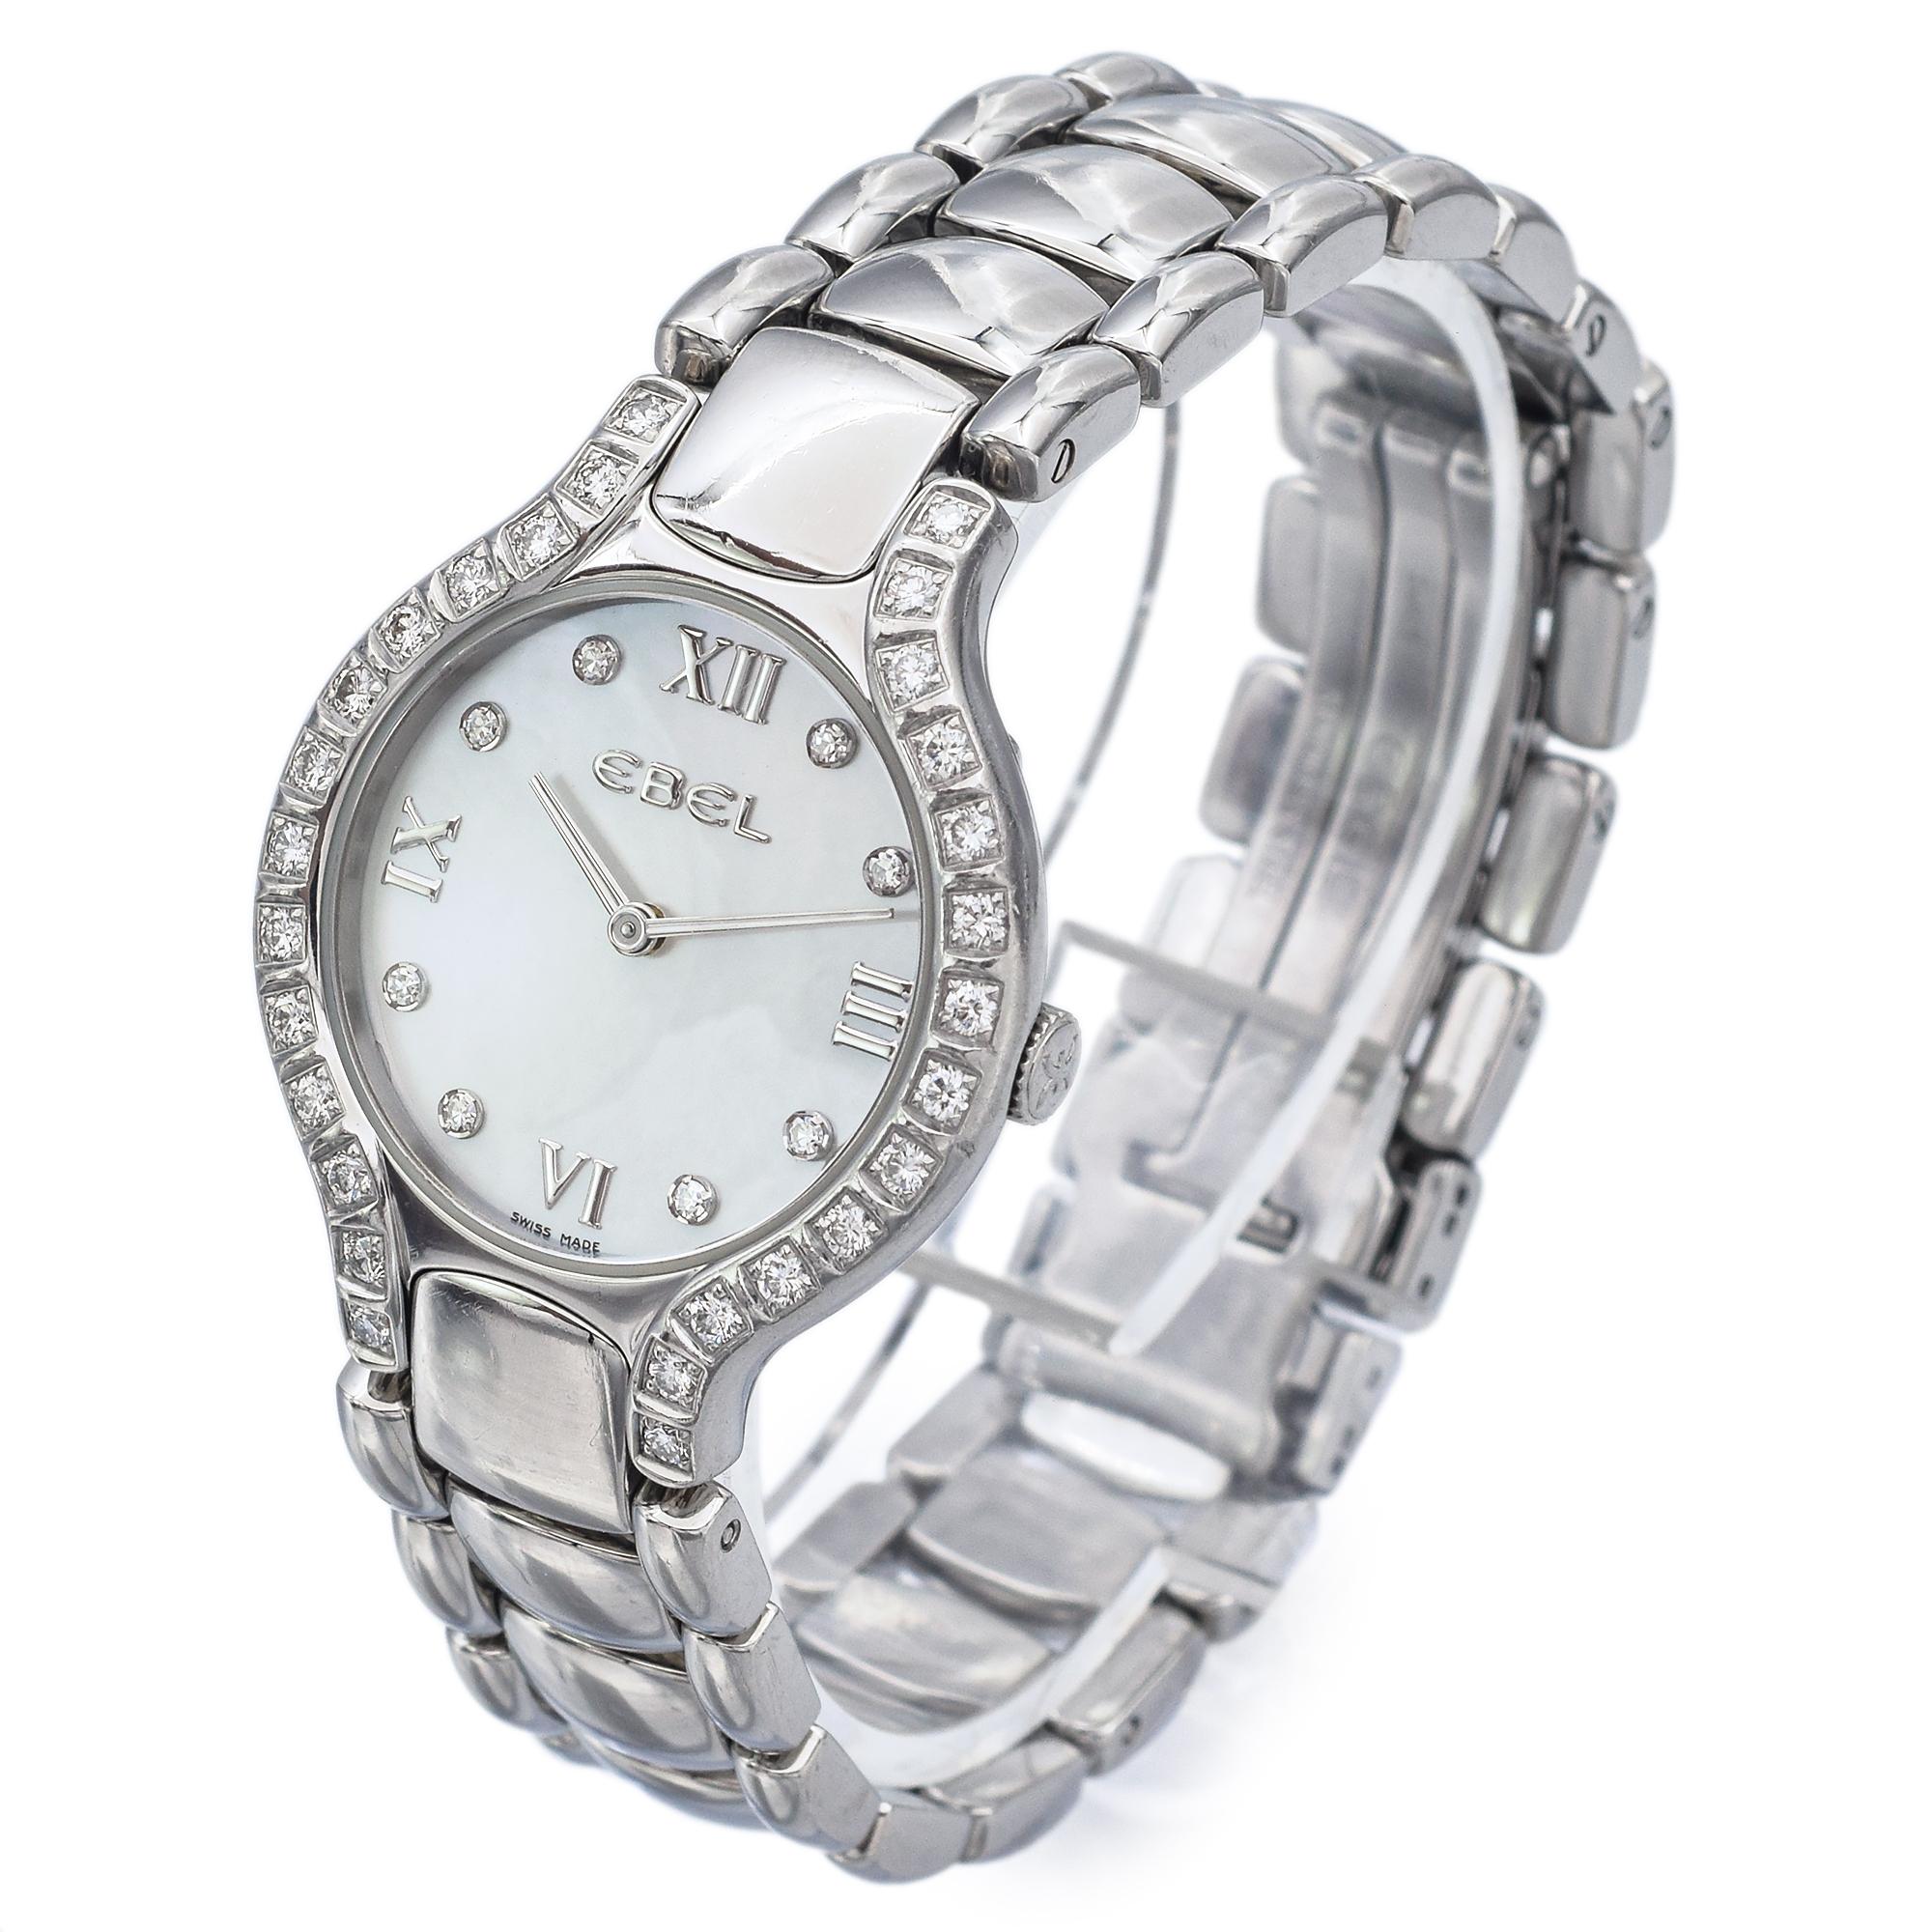 Good condition, fresh battery

Case Size: 27mm
Stone: Mother of Pearl, Diamonds (1.3-1.75 mm)
Band Length: 6 Inches
Hallmark: Ebel

Item #: BR-1055-092123-19